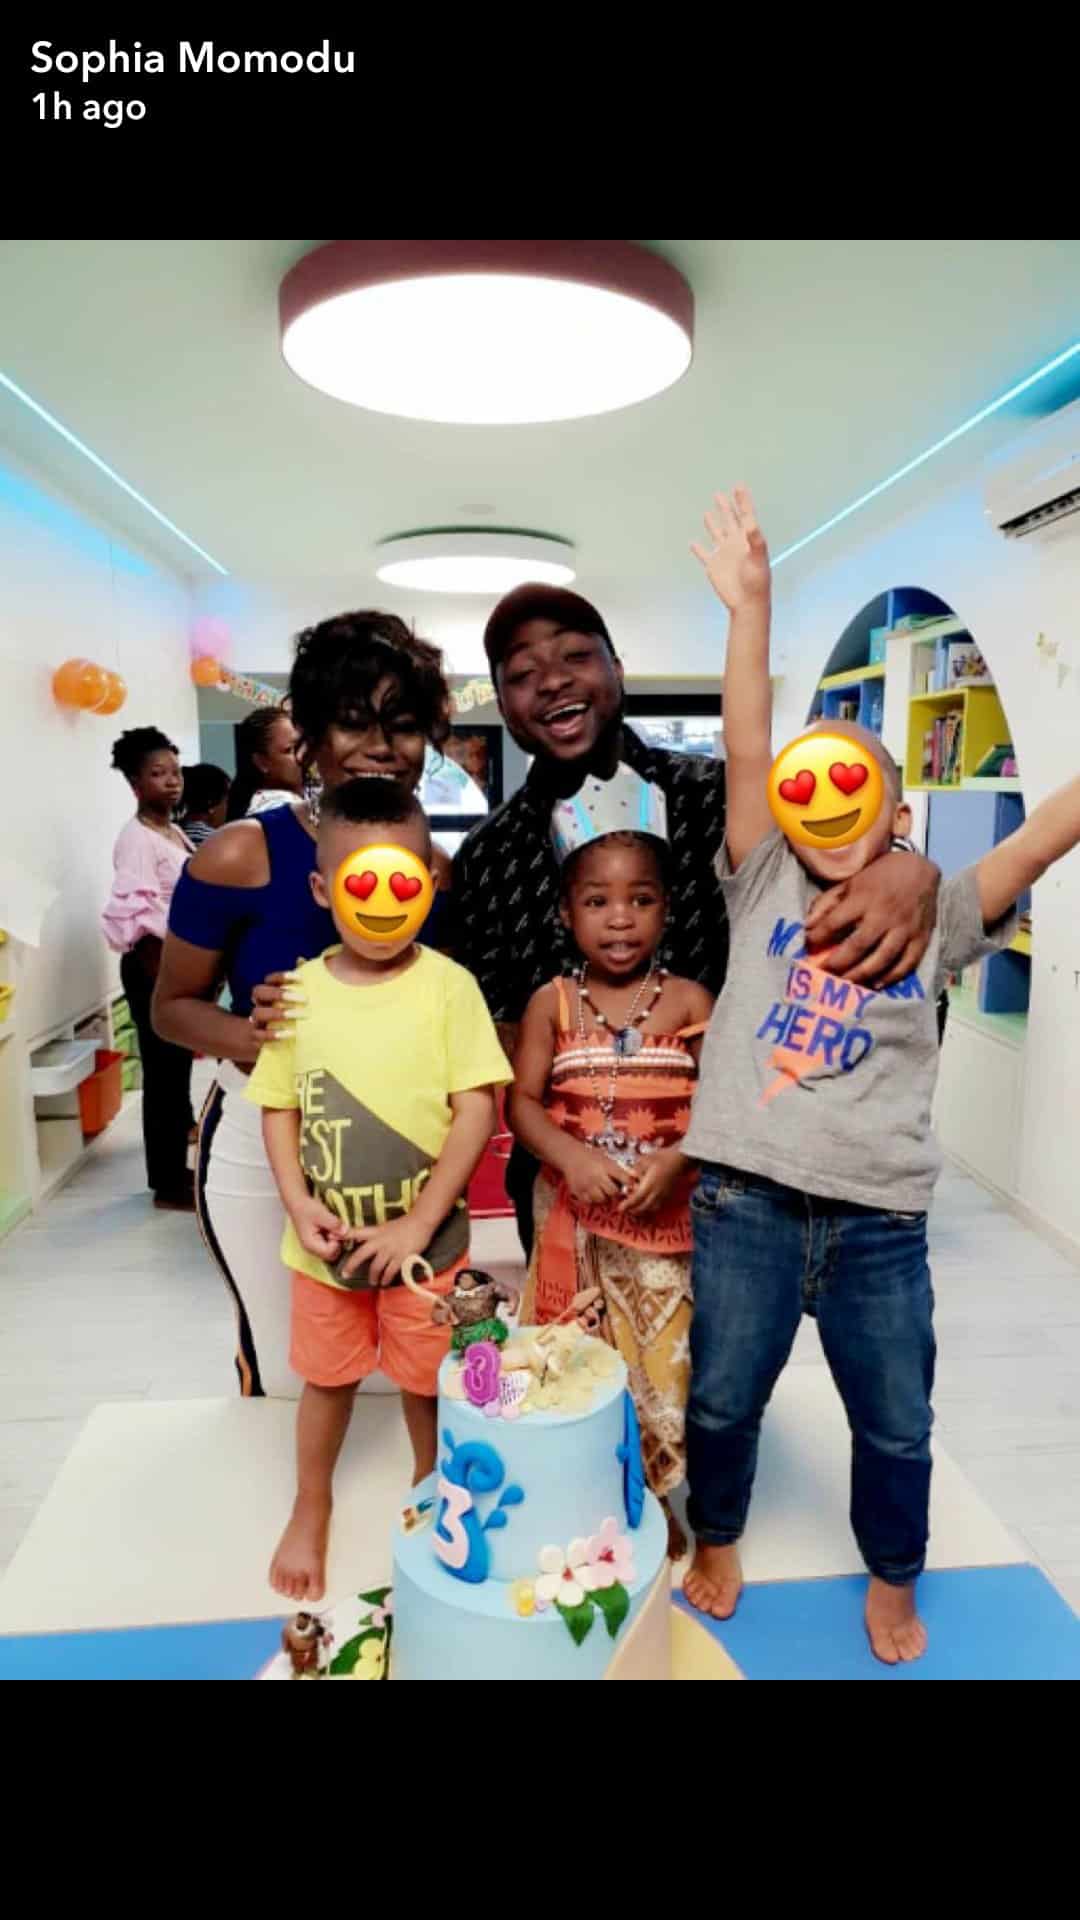 Sophia Momodu and Davido turn up for their daughter's birthday party